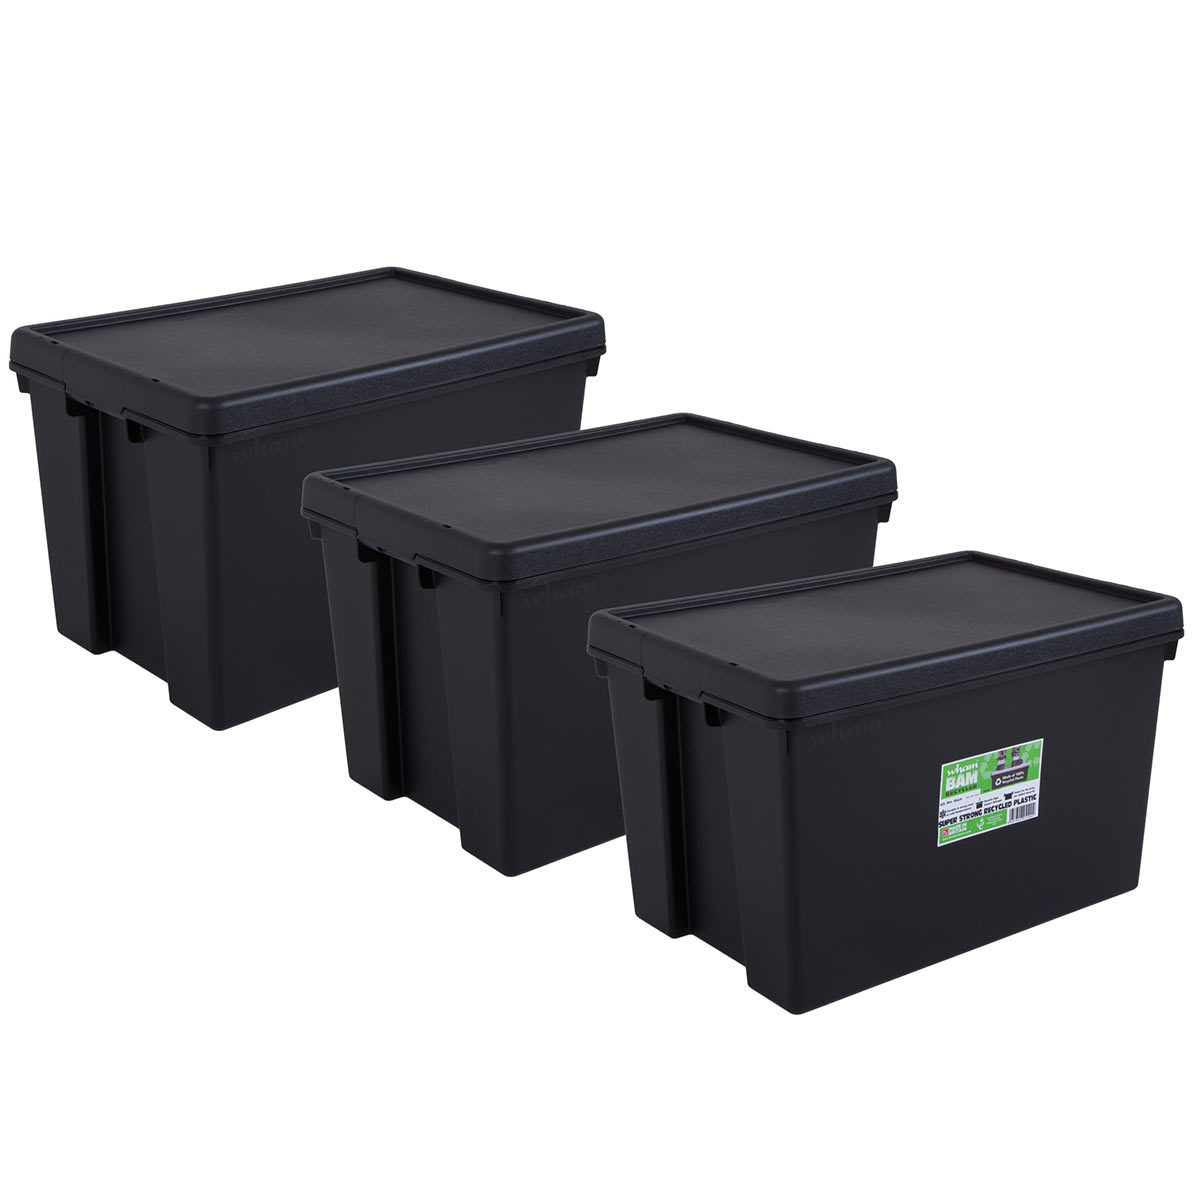 Wham Bam Black Recycled Storage Boxes with Lids Stackable ALL SIZES 